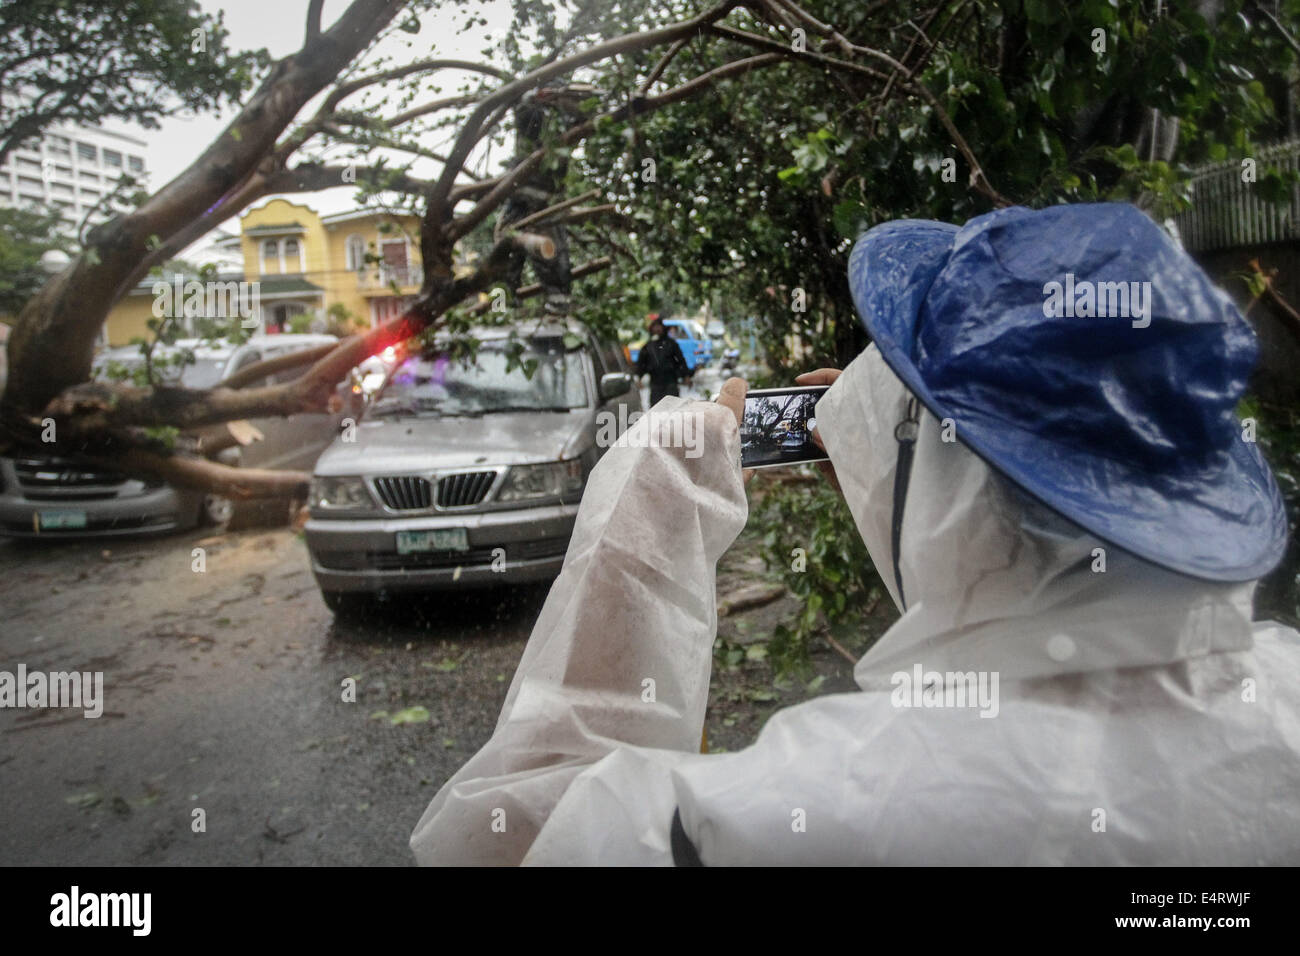 Manila, Philippines. 16th July, 2014. A man takes a picture of damaged cars near a private subdivision in Makati City as Typhoon Rammasun hit Metro Manila on July 16, 2014. Typhoon Rammasun (locally known as Glenda) had maximum sustained winds of 150 kph and gustiness of up to 185 kph when it hit Metro Manila. Across the country, about 400,000 people had fled their homes and sheltered in evacuation centers, according to the disaster management council. Credit:  ZUMA Press, Inc./Alamy Live News Stock Photo